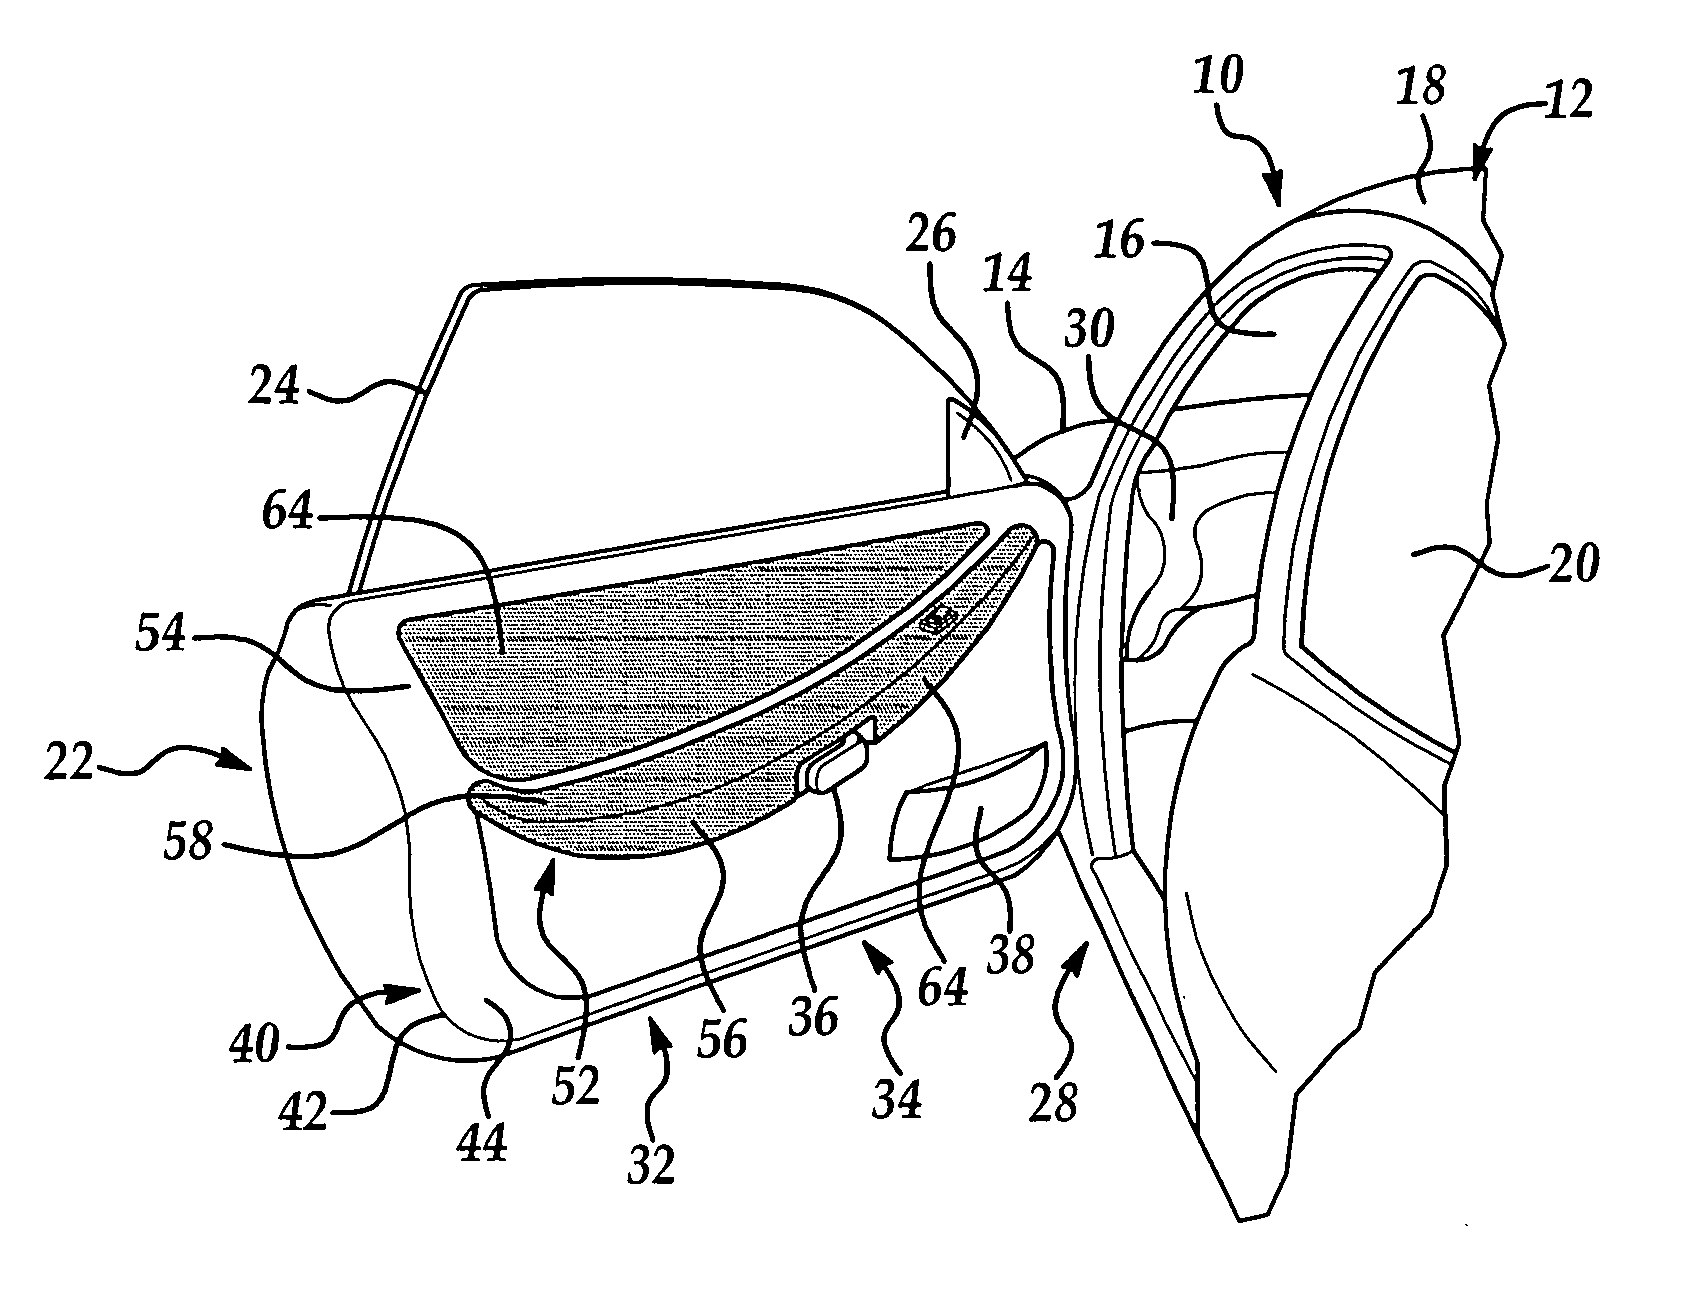 Door trim panel assembly having integrated soft-touch aesthetic feature and method of manufacturing same